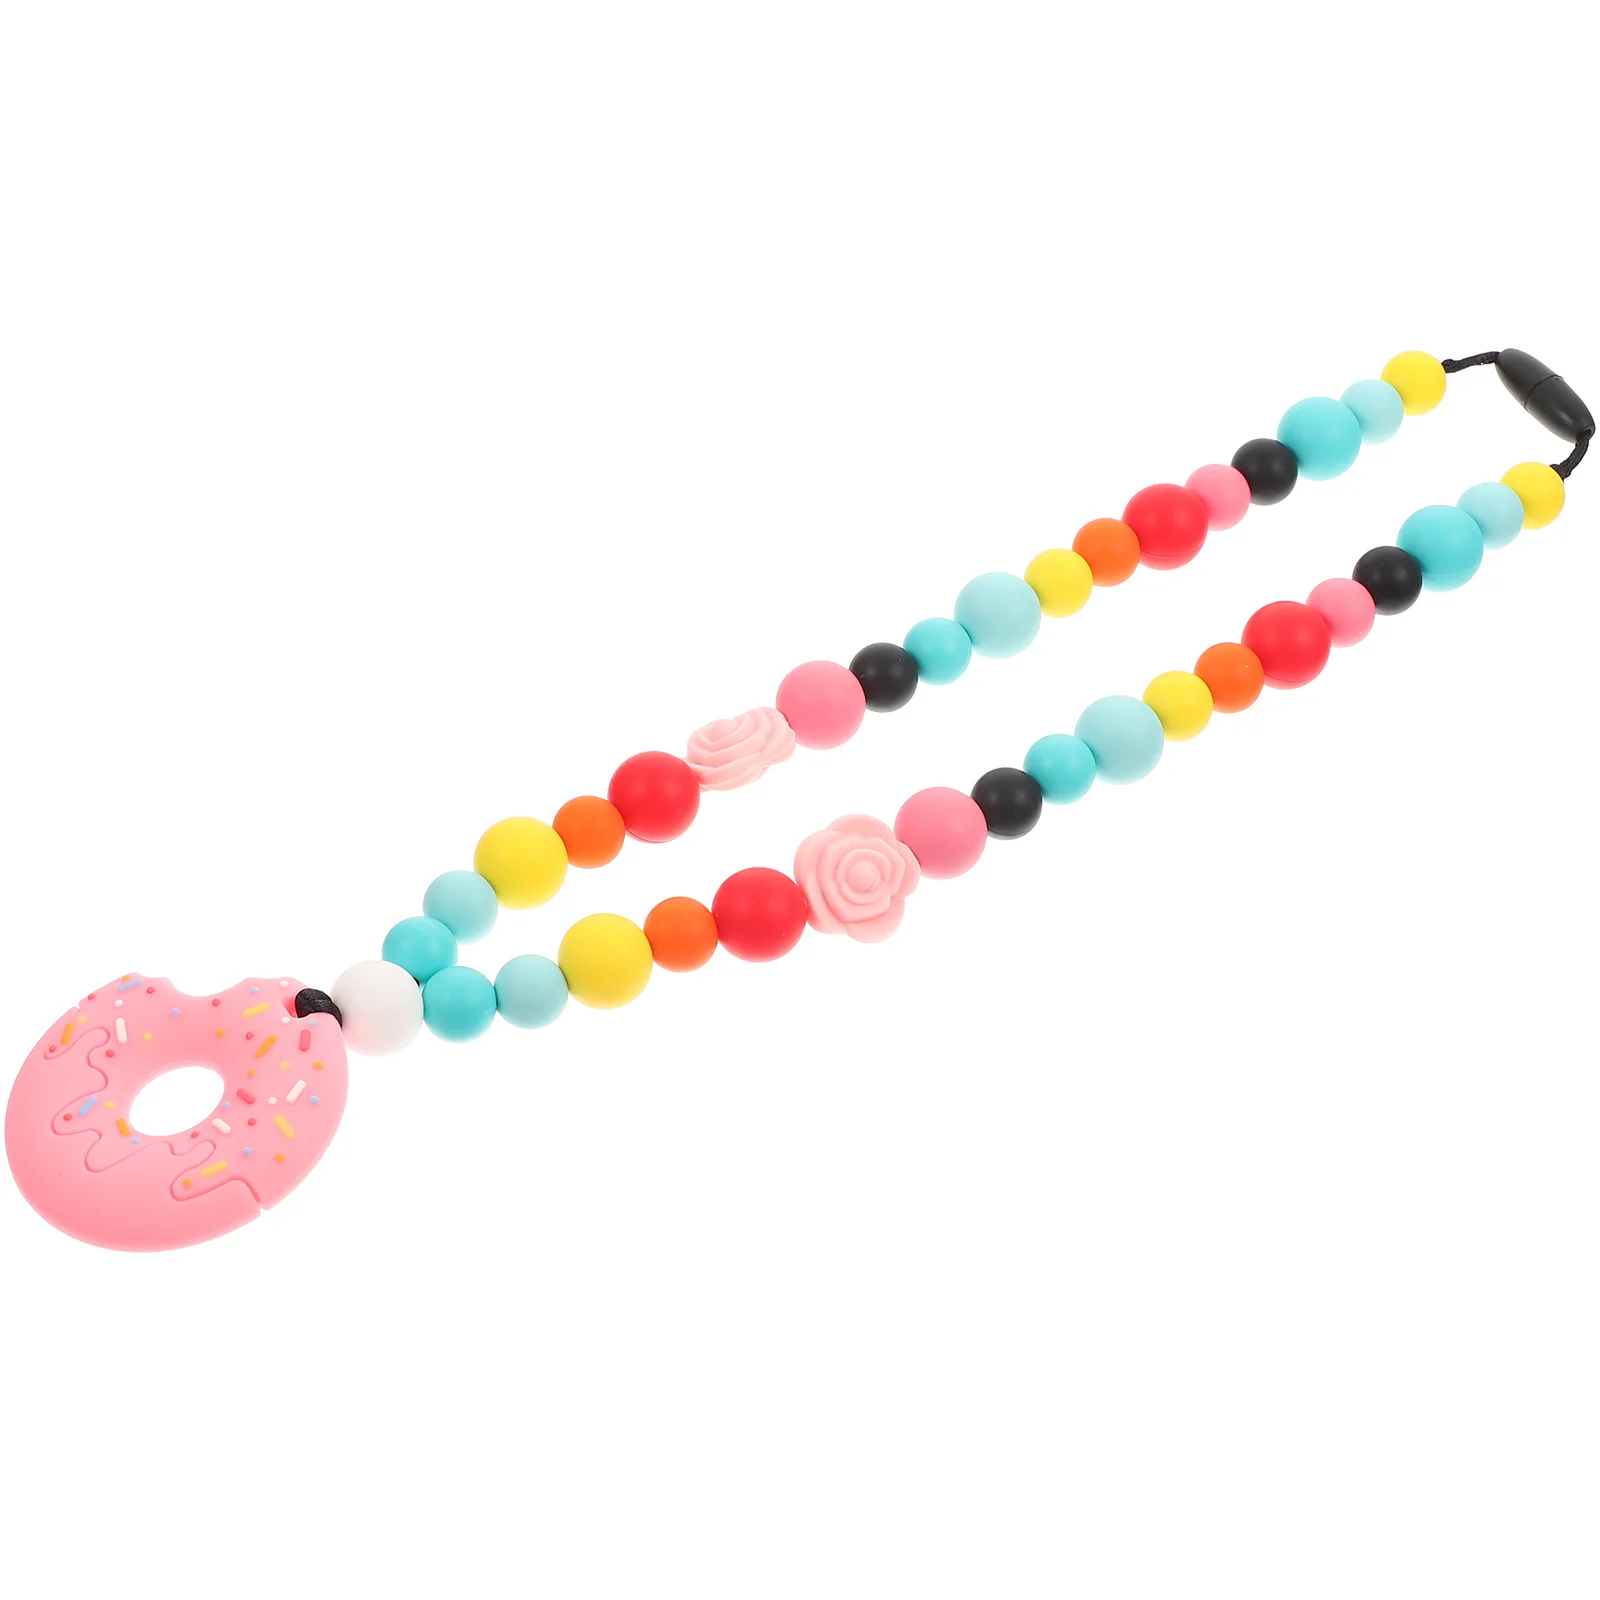 

Baby Necklace Toy Silicone Grabbing Teething Toys Chewing Toddle Props Teether Girleducational Infant Newborn Beaded Chewable